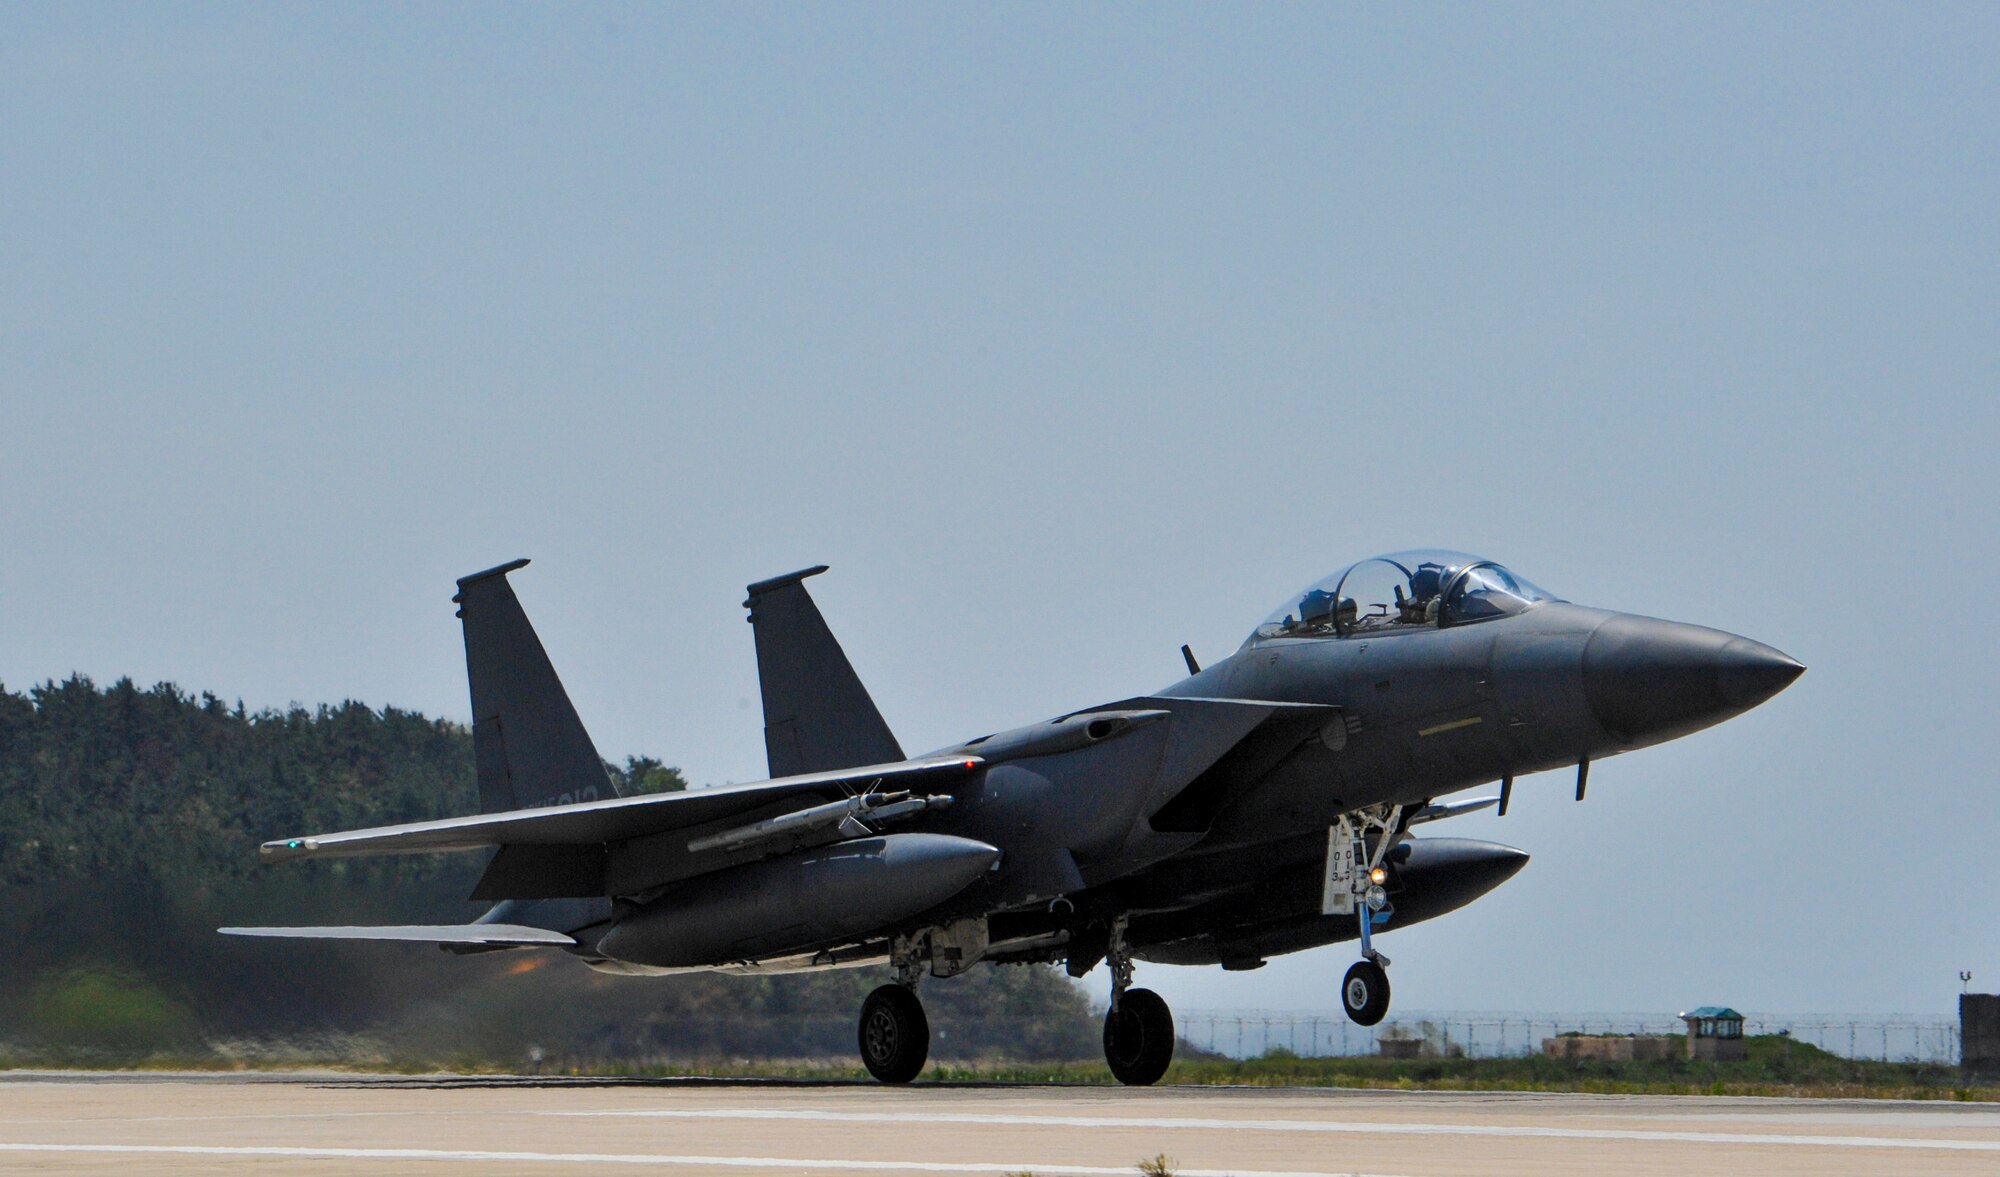 A Republic of Korea Air Force F-15K Slam Eagles from the 11th Fighter Squadron, Daegu Air Base, ROK, takes off during Exercise MAX THUNDER 17 at Kunsan Air Base, Republic of Korea, April 27, 2017. In Max Thunder, U.S. and ROK air forces consistently train together to be ready around-the-clock to defend the Republic of Korea. The interoperability and trust developed between the allies in training is critical to ensure U.S and ROK are prepared for any challenge. (U.S. Air Force photo by Senior Airman Colville McFee/Released)